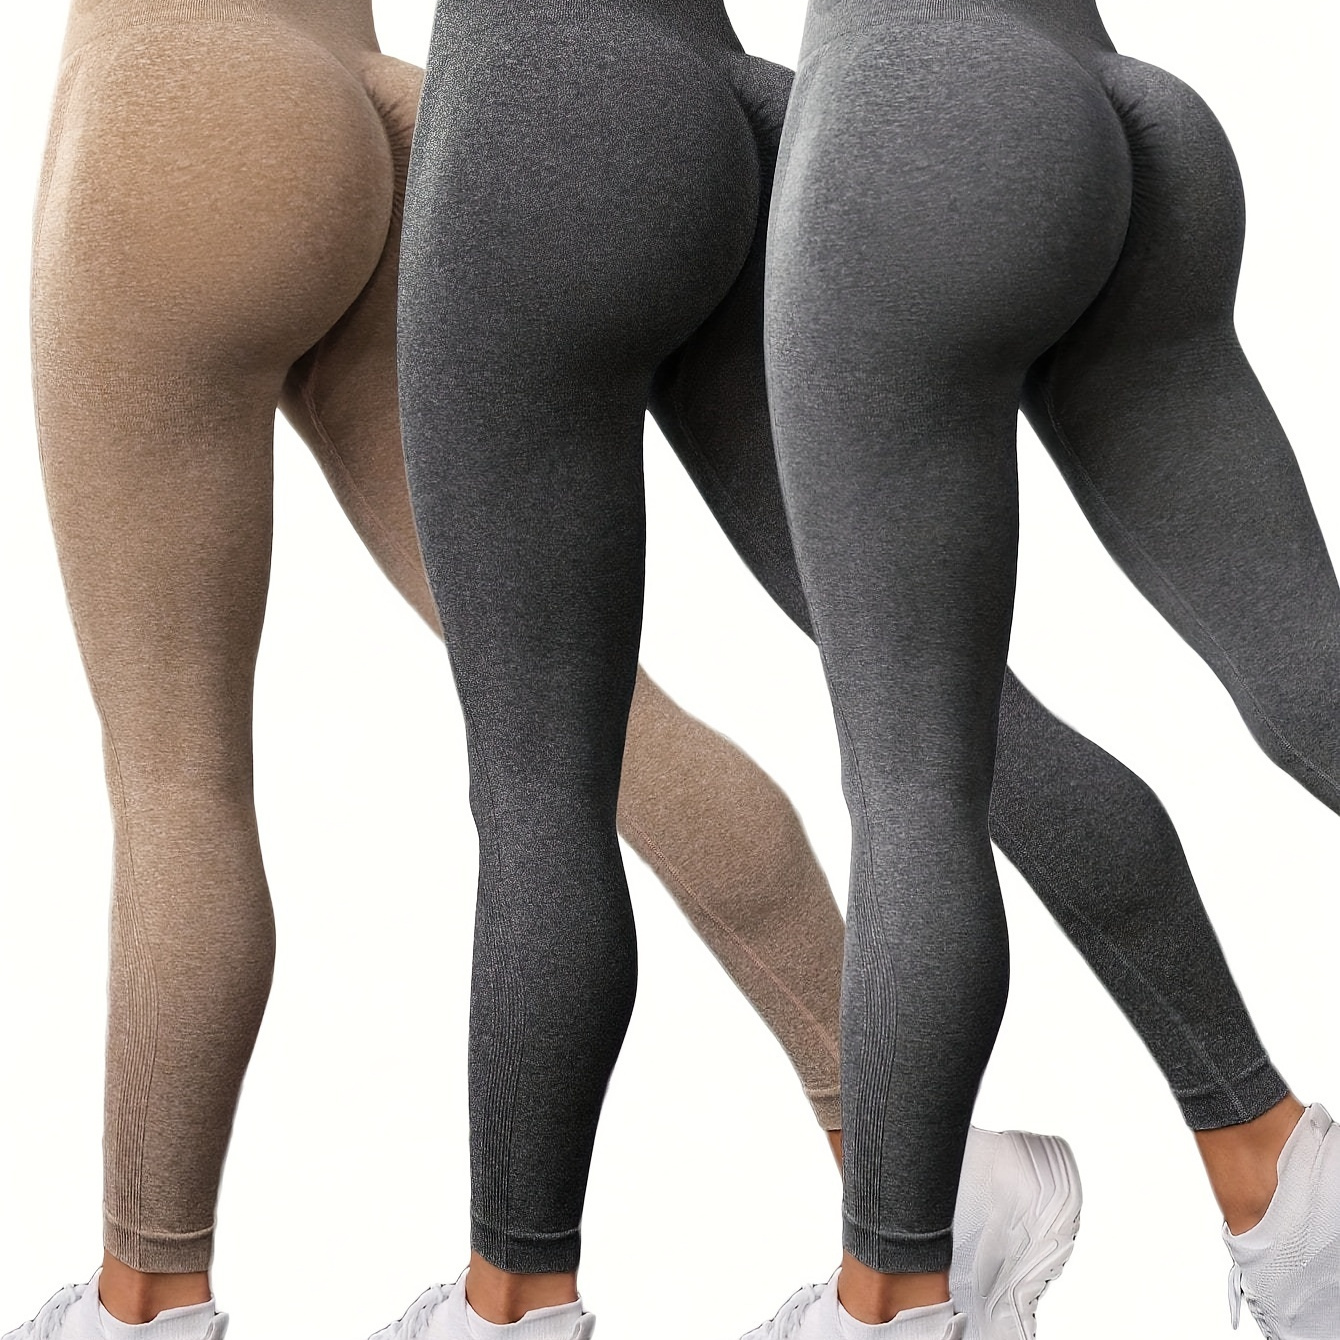 

3 Pack Seamless High-waisted Tummy Control Yoga Pants, Sport Style Athletic Leggings, Breathable Stretch Fabric For Gym & Casual Wear Wide Waistband